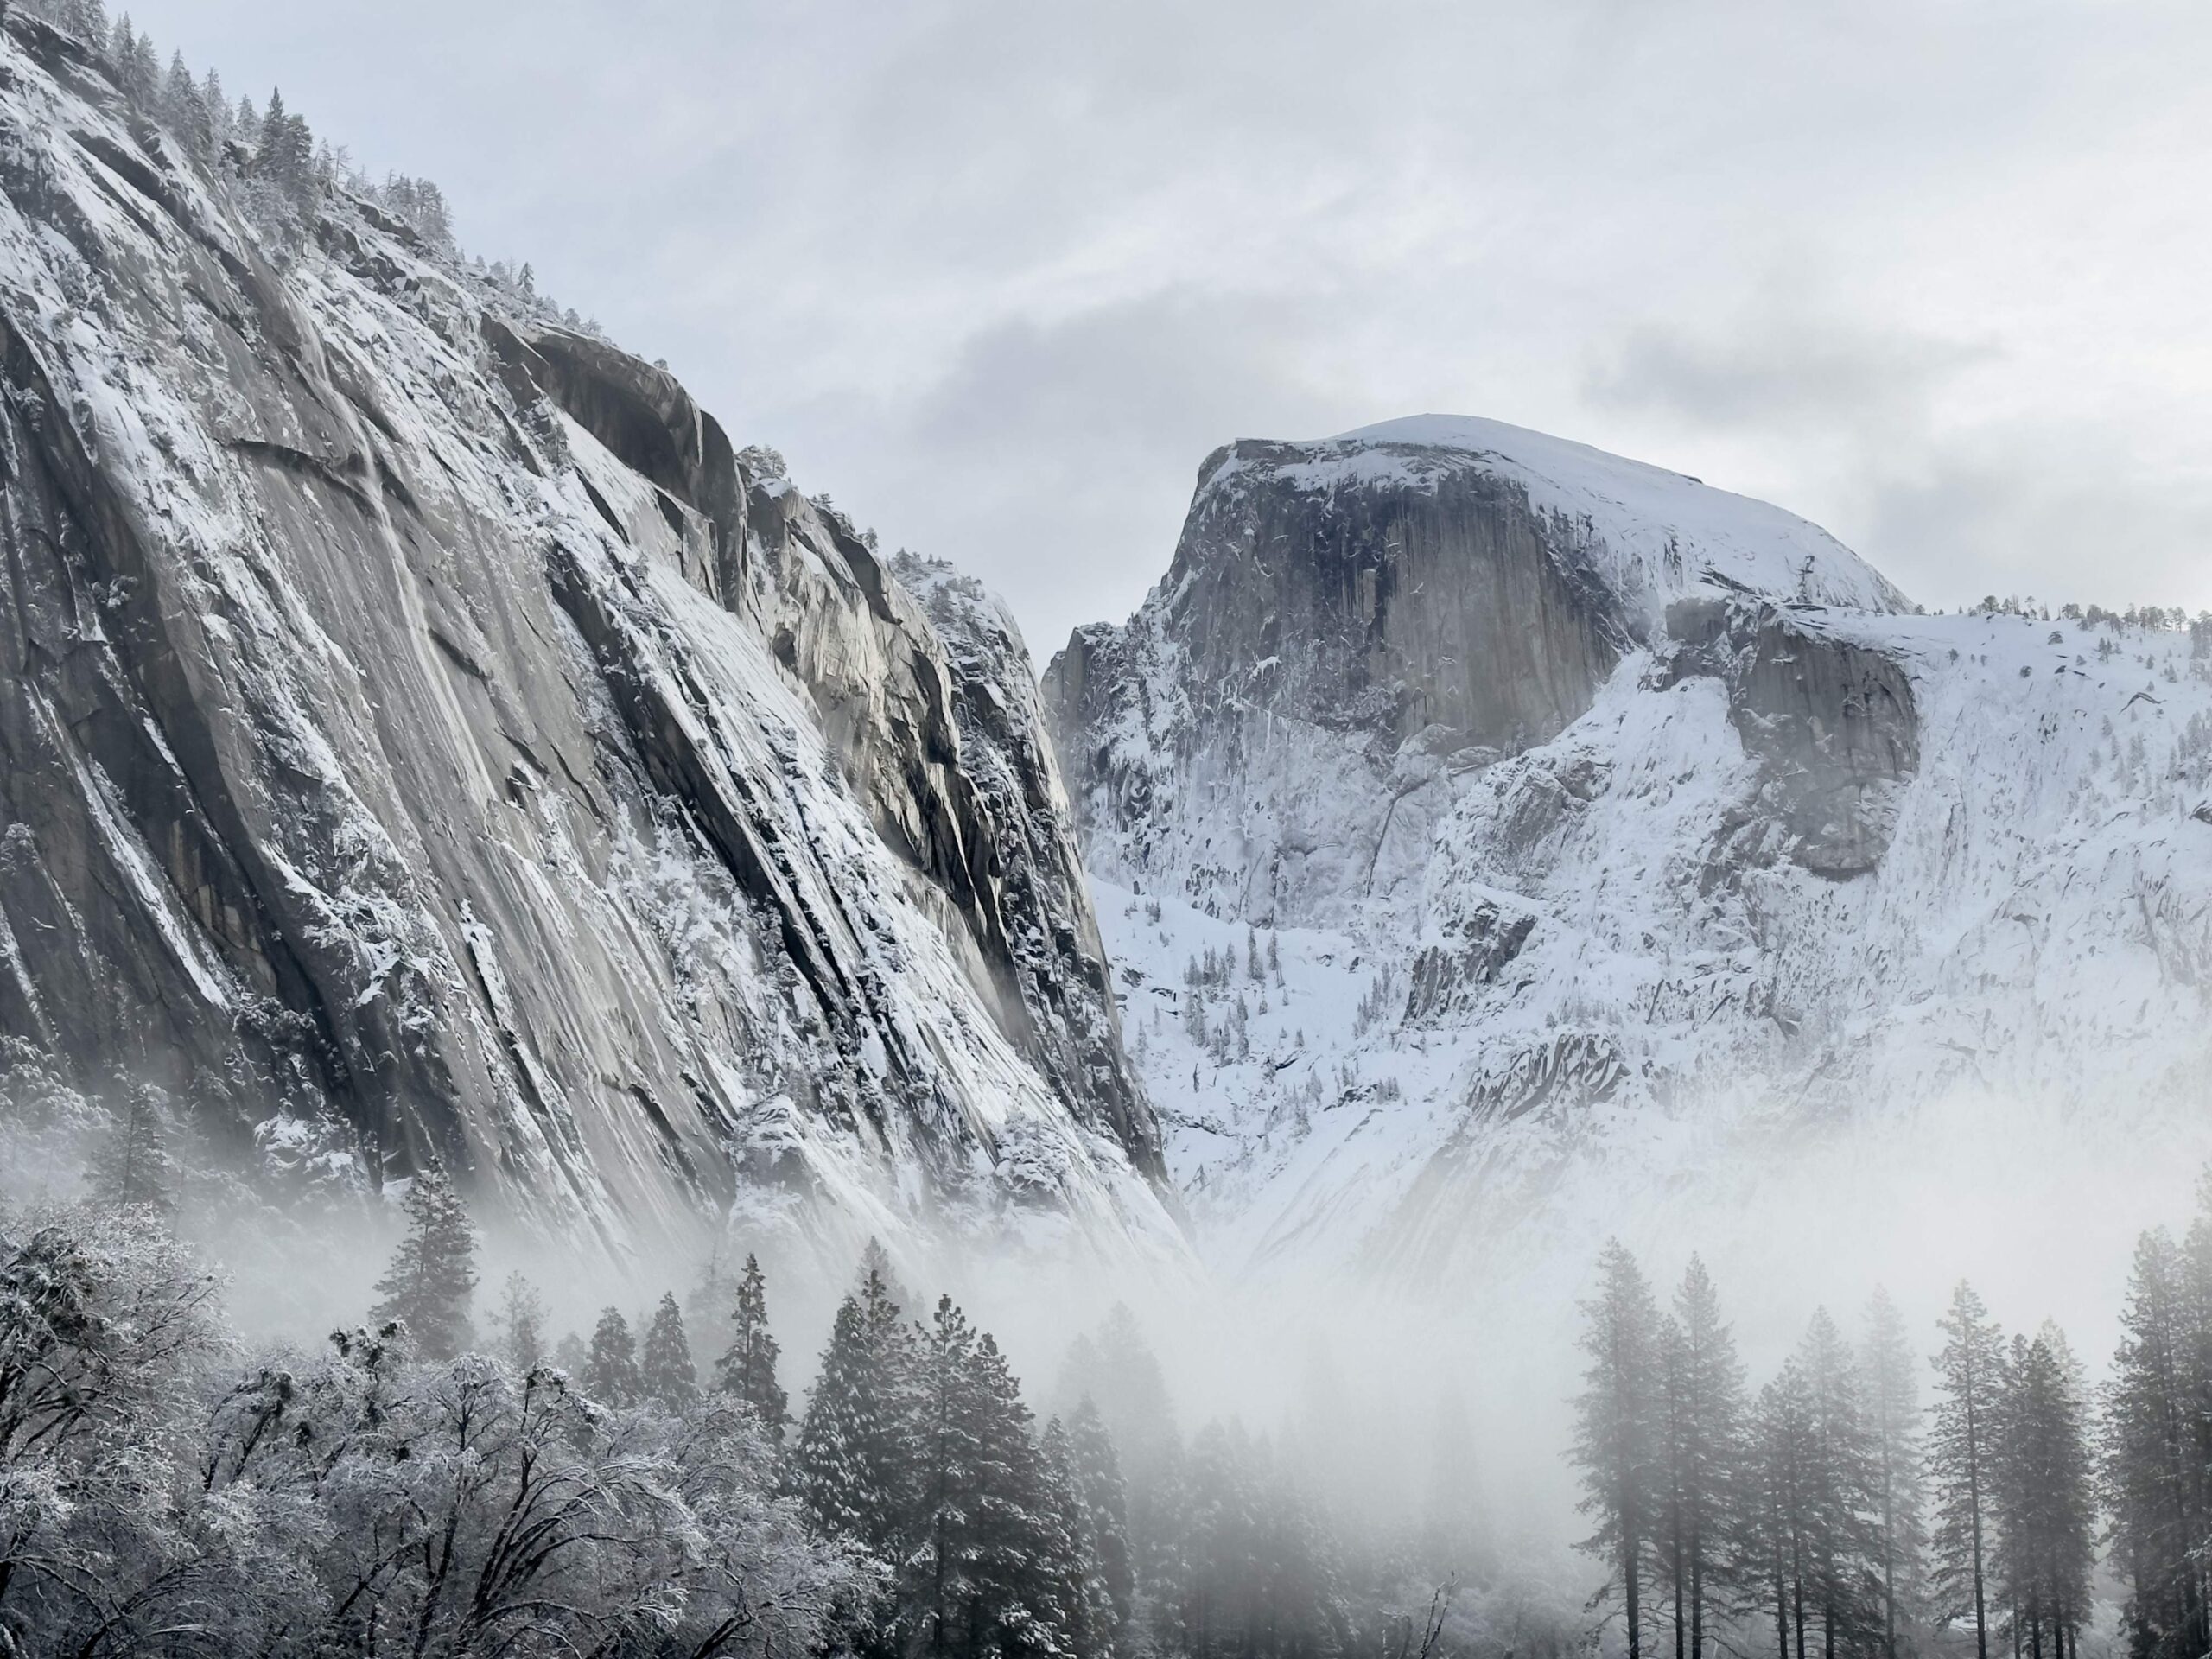 One of the classic winter views inYosemite half dome dusted in show and shrowded in fog